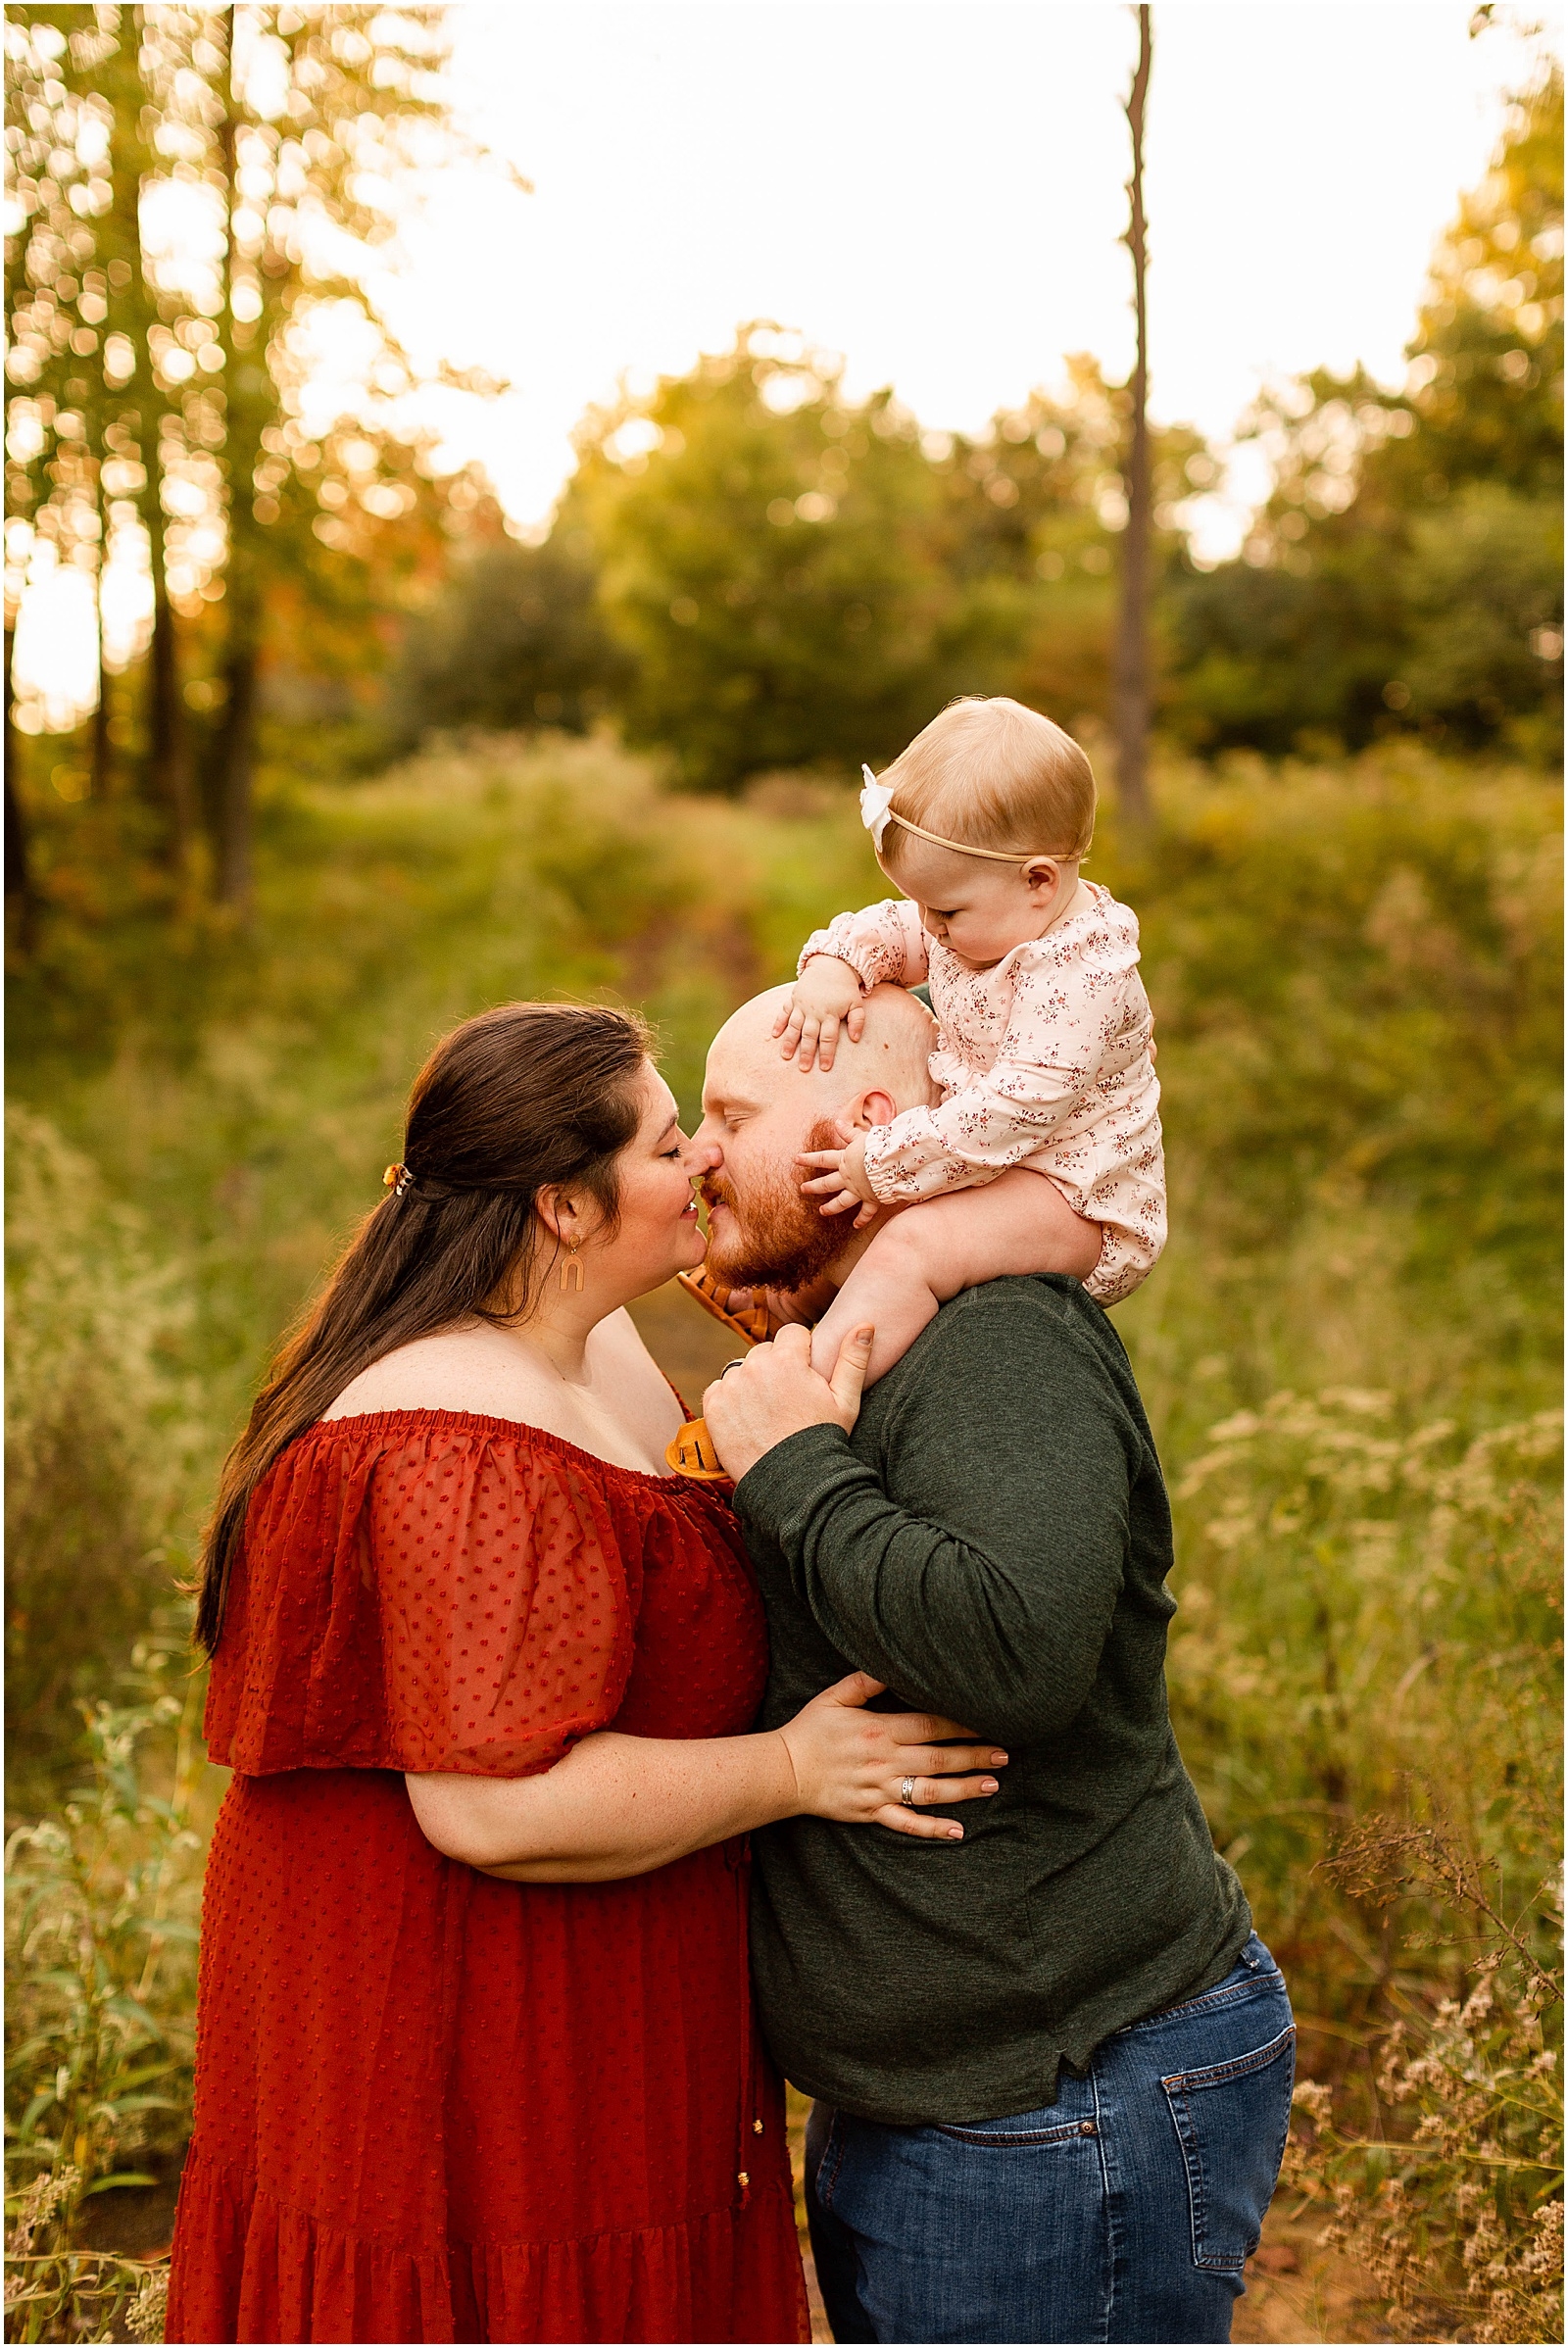 The Peck's Fall Family Session Bret and Brandie Photography | Evansville Indiana Wedding Photographers_0041.jpg